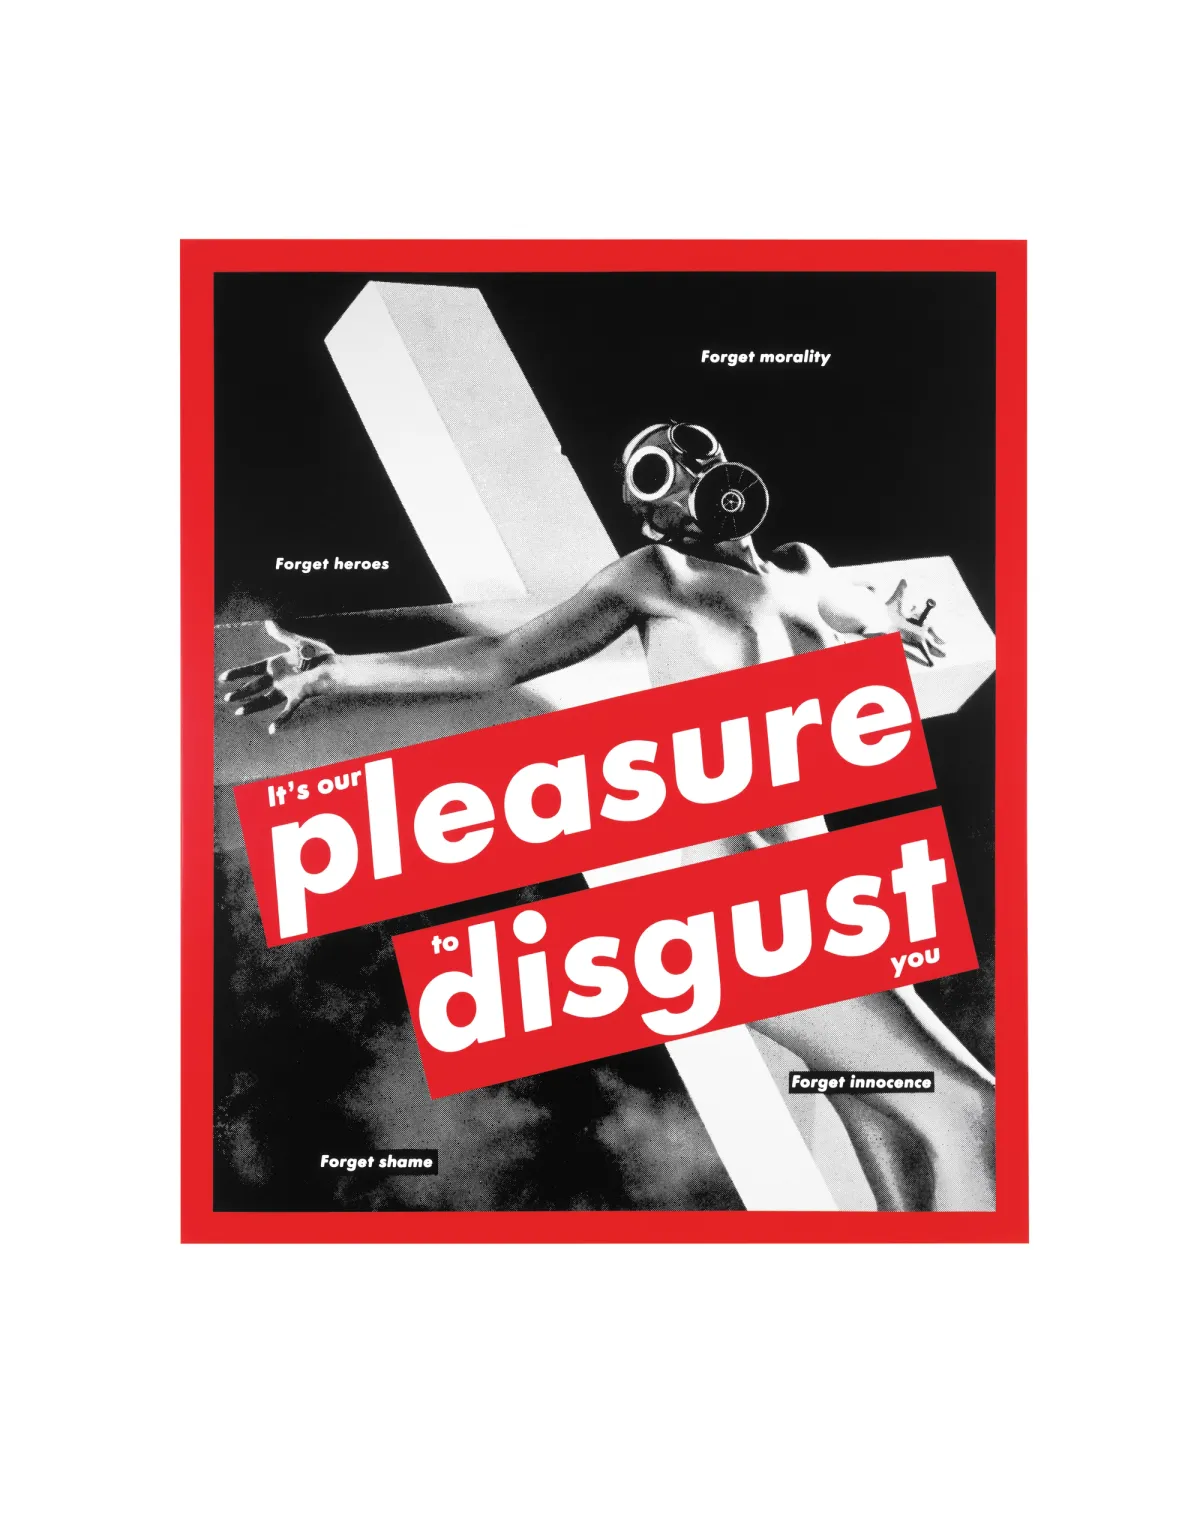 A black and white photographic silkscreen on vinyl featuring an image of a naked individual, crucified and wearing a gas mask. The image is partially obscured by a red text line reading "It's our pleasure to disgust you" and additional text that says "forget innocence, forget morality, forget heroes, forget shame". The entire piece is framed in red.